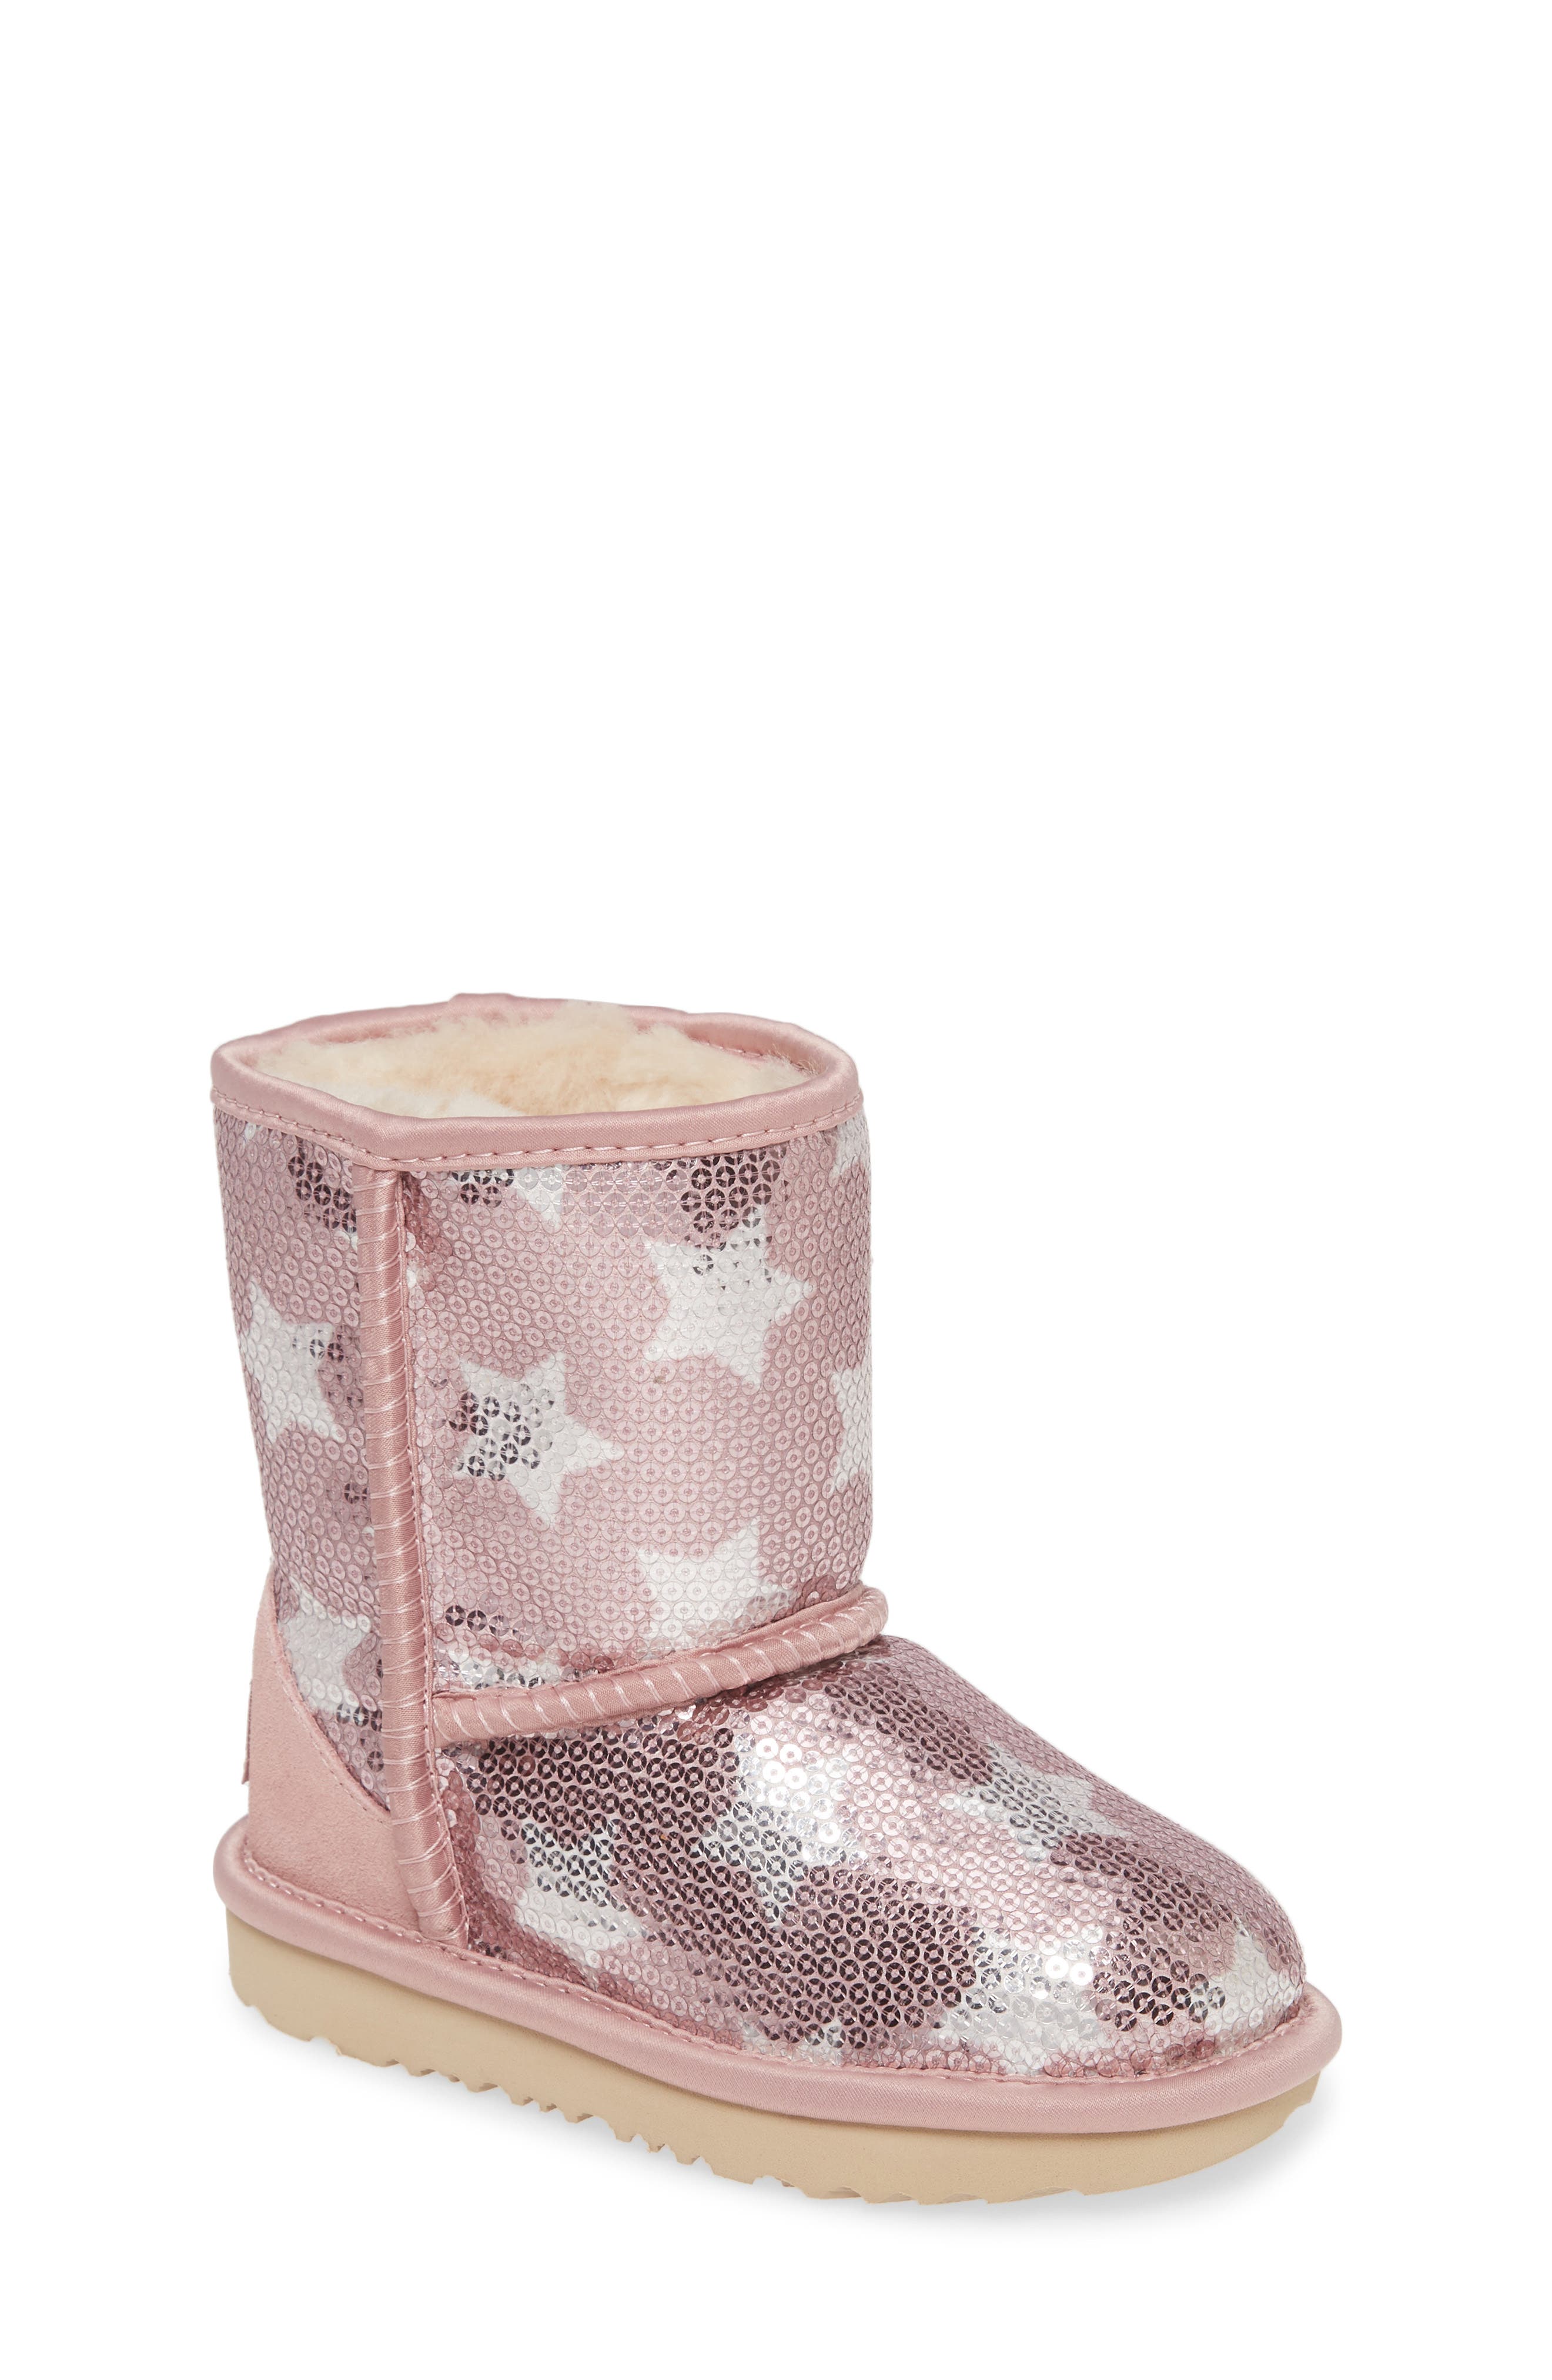 uggs with stars